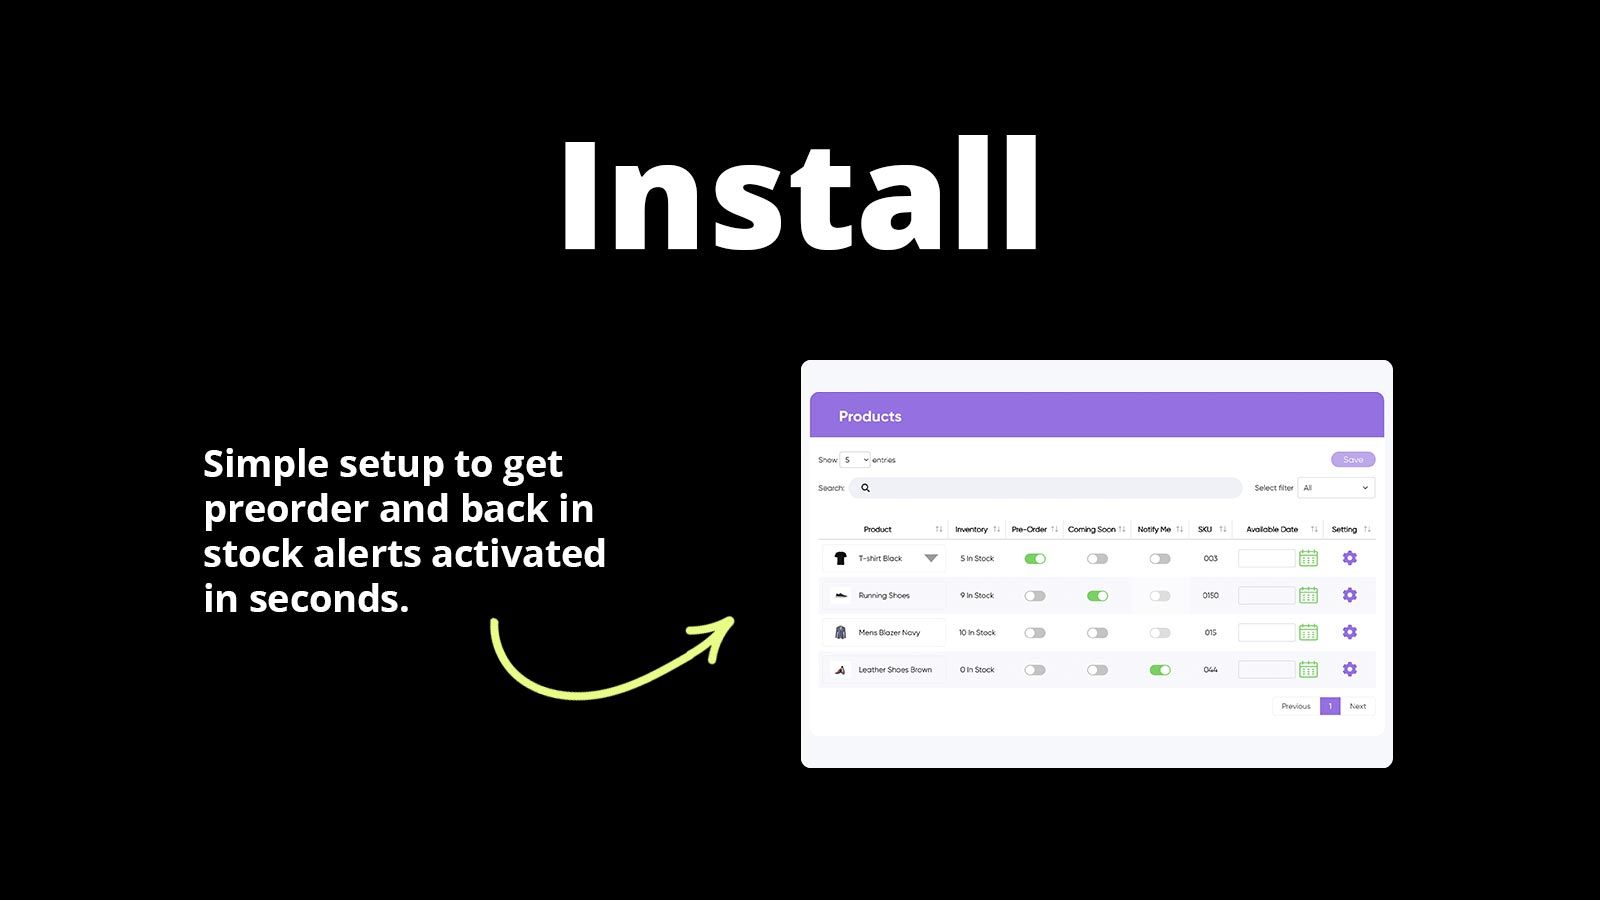 Install - Simple setup to activate preorder and in stock alerts